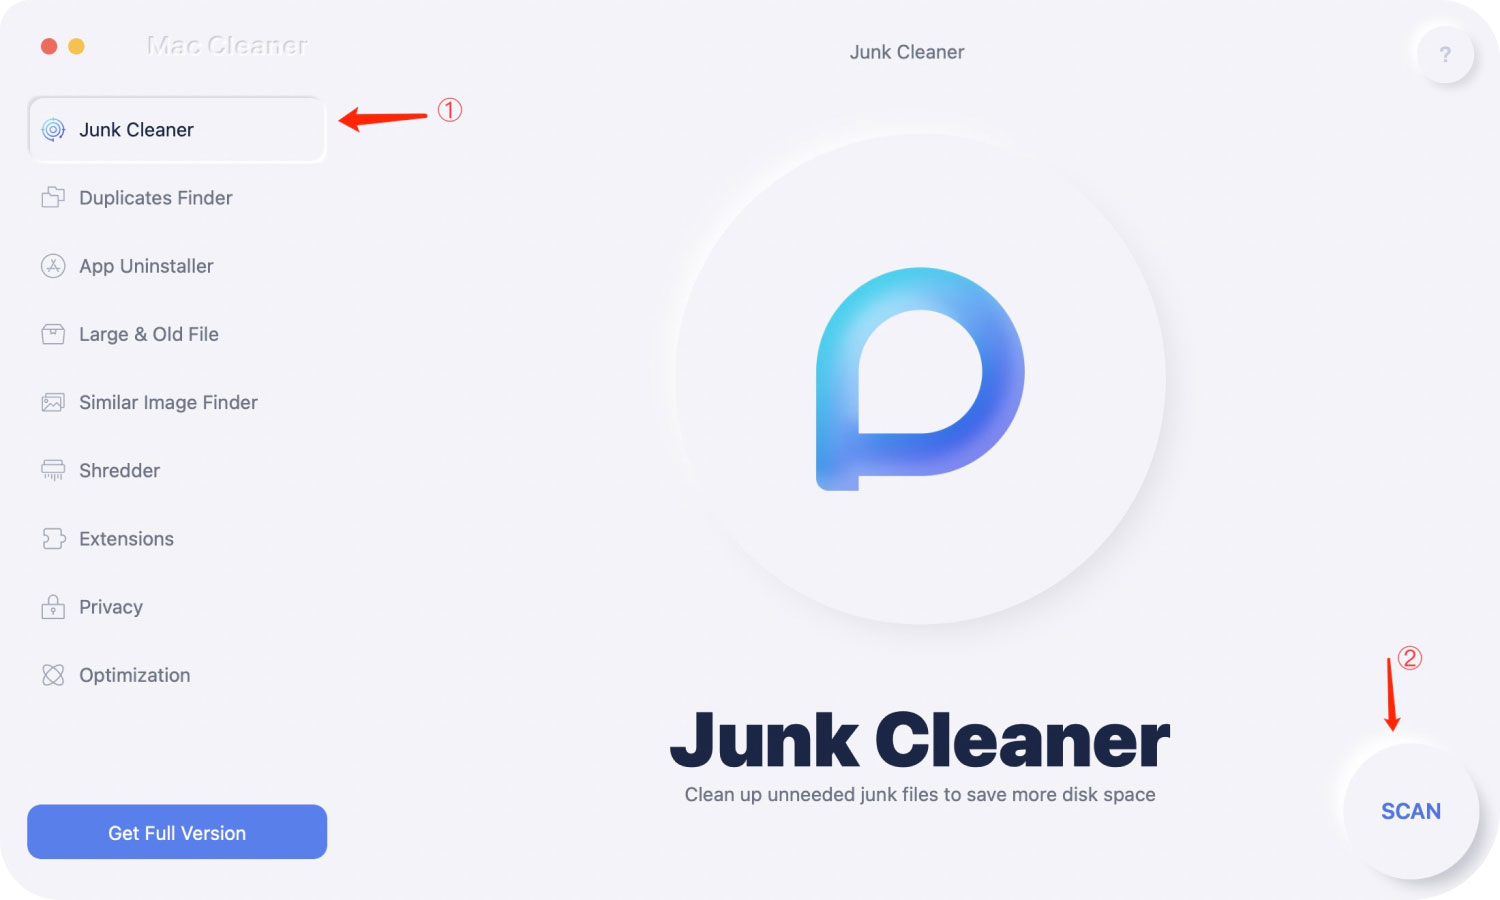 Select Junk Cleaner for Cleaning Flash Drive on Mac